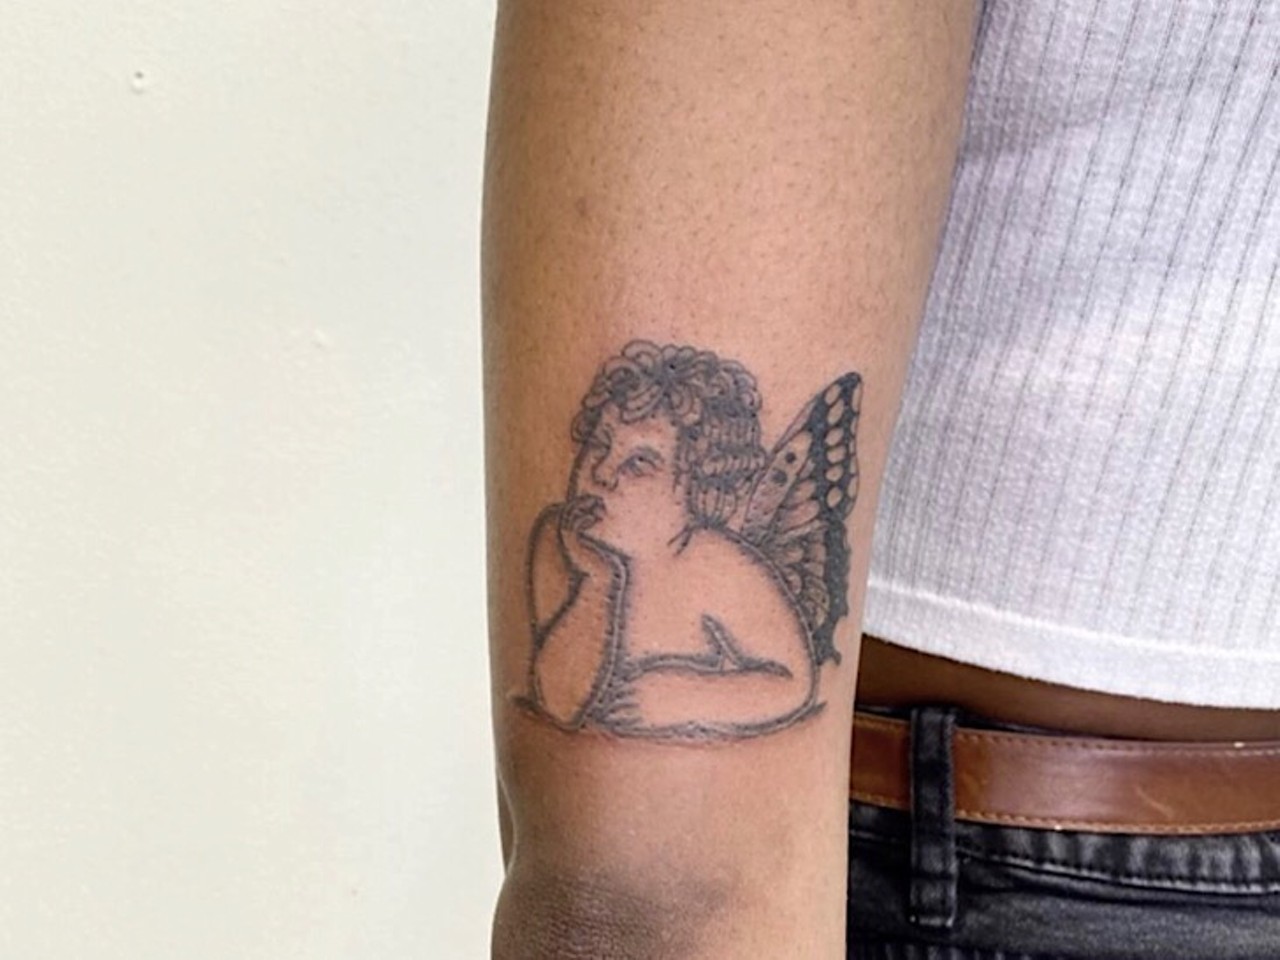 20 Tampa Bay tattoo artists you should be following on Instagram